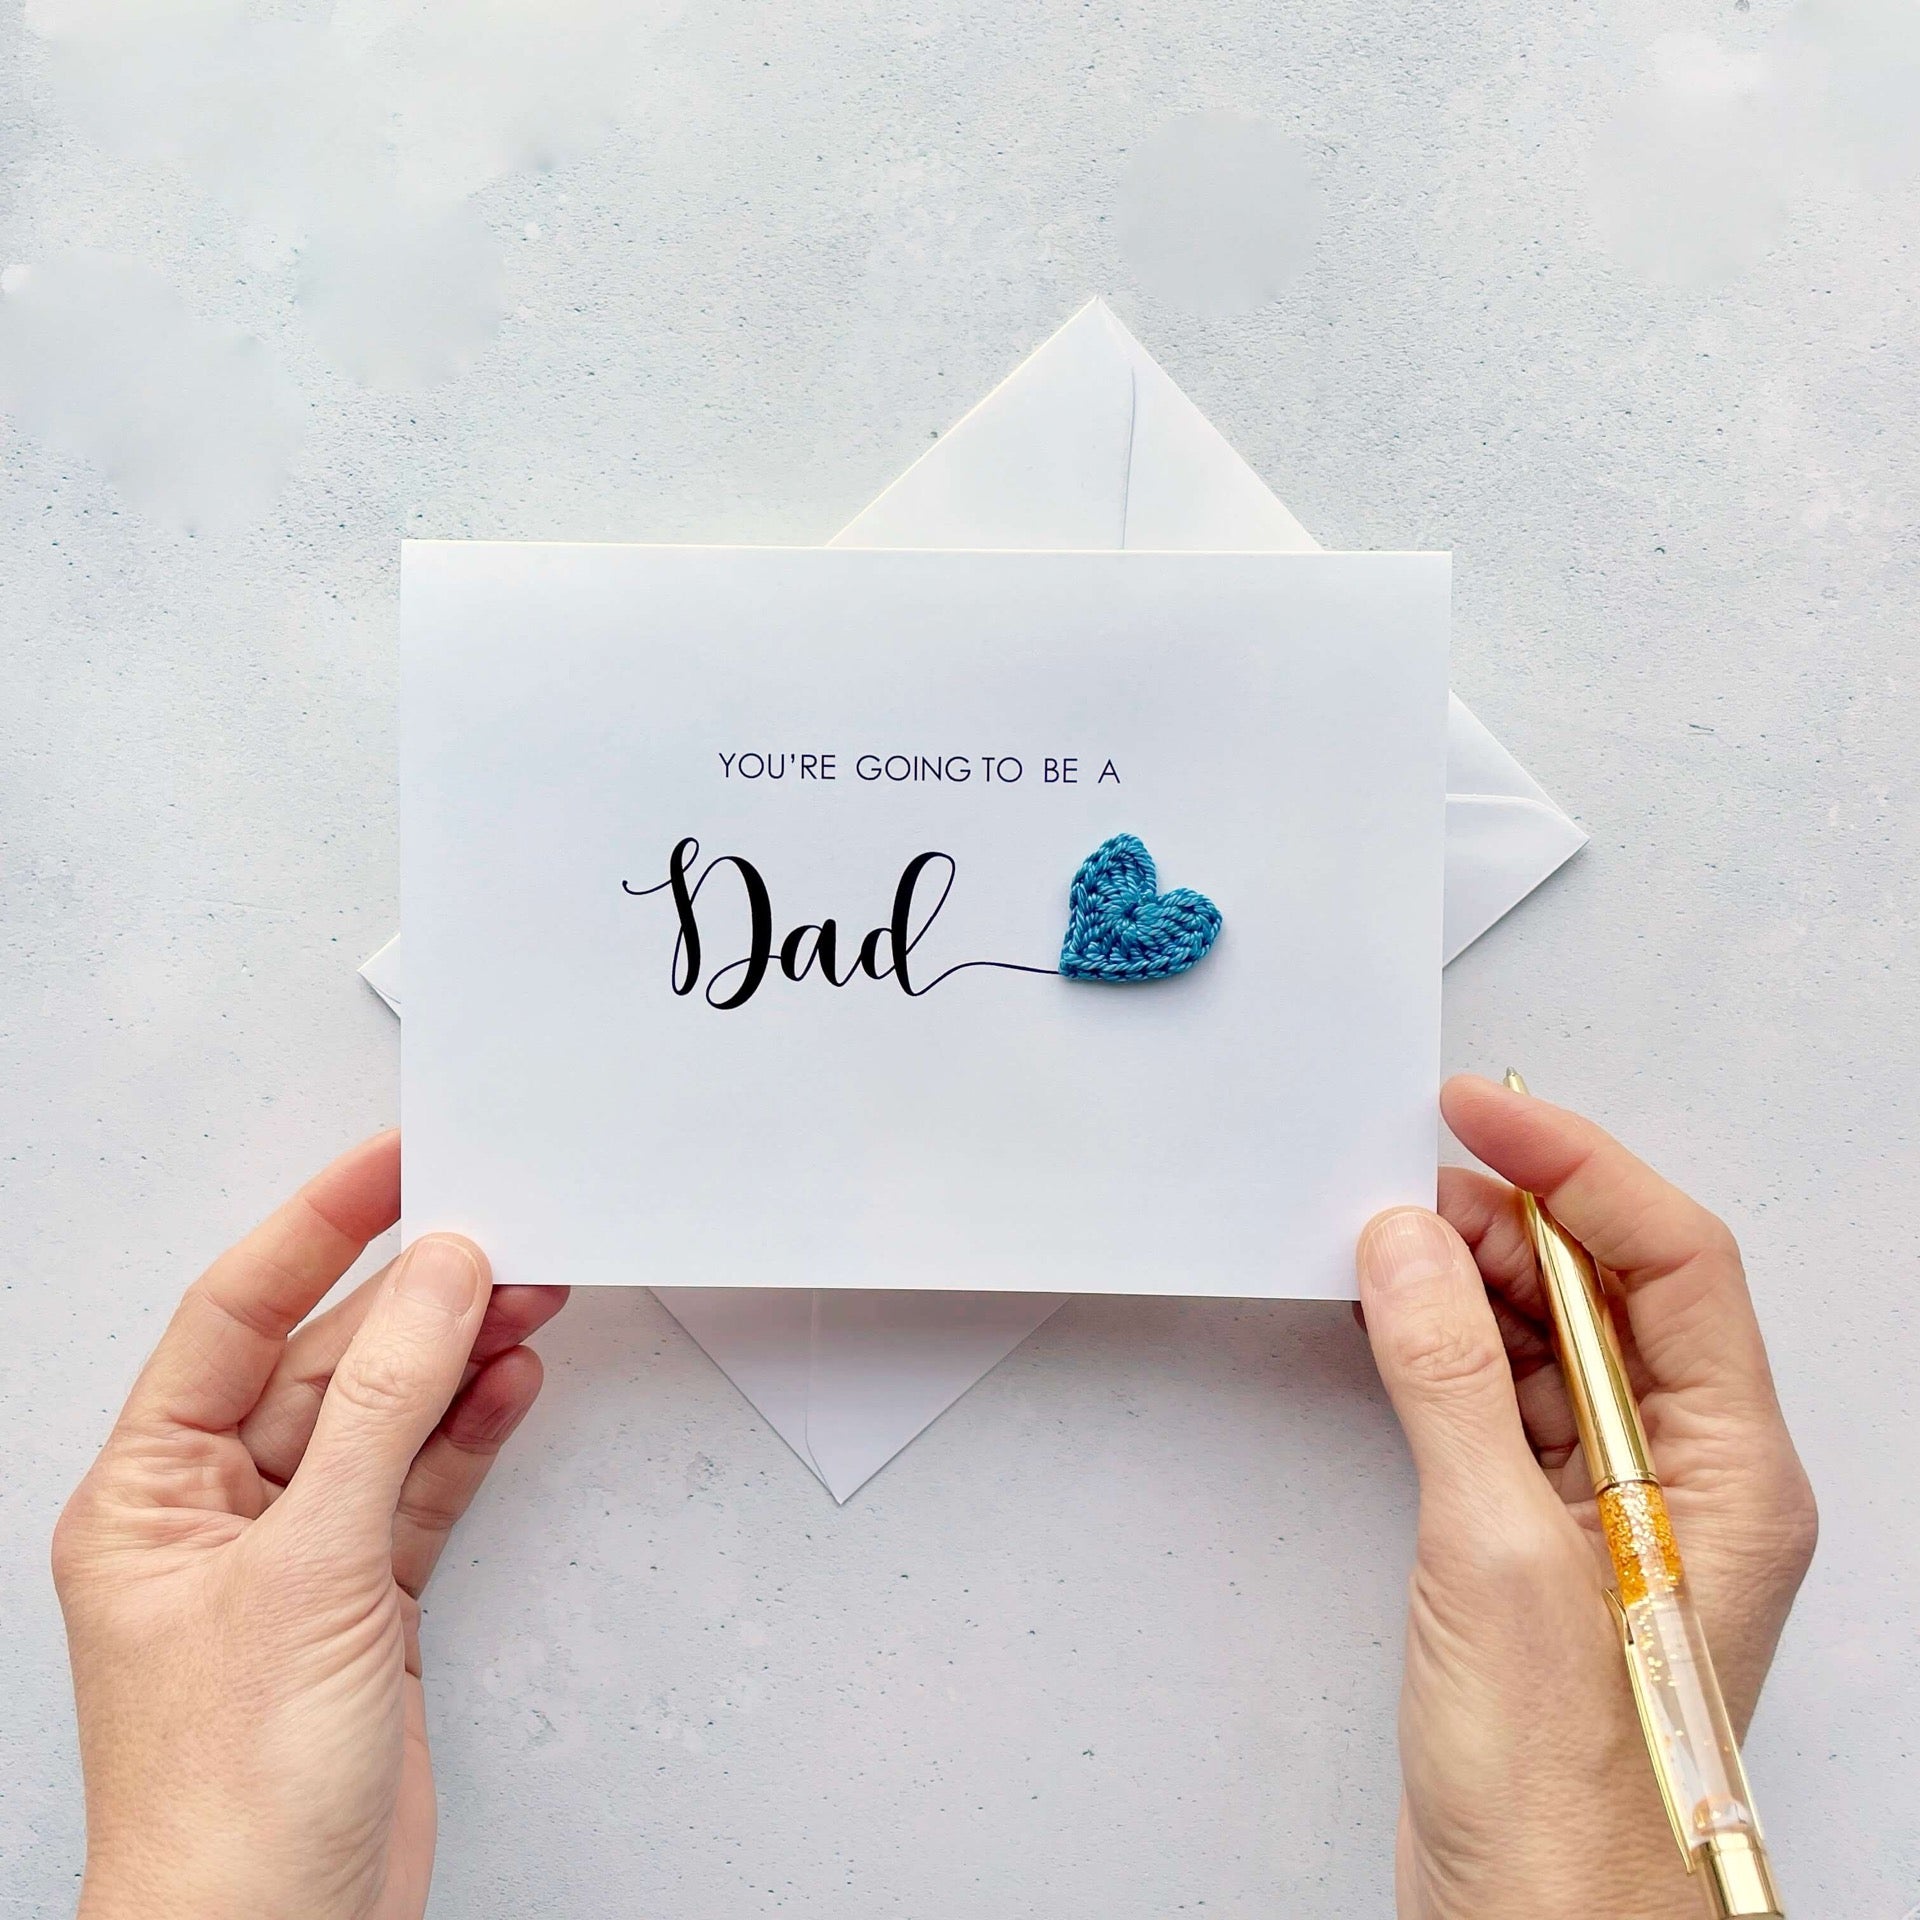 Going to be a Dad card